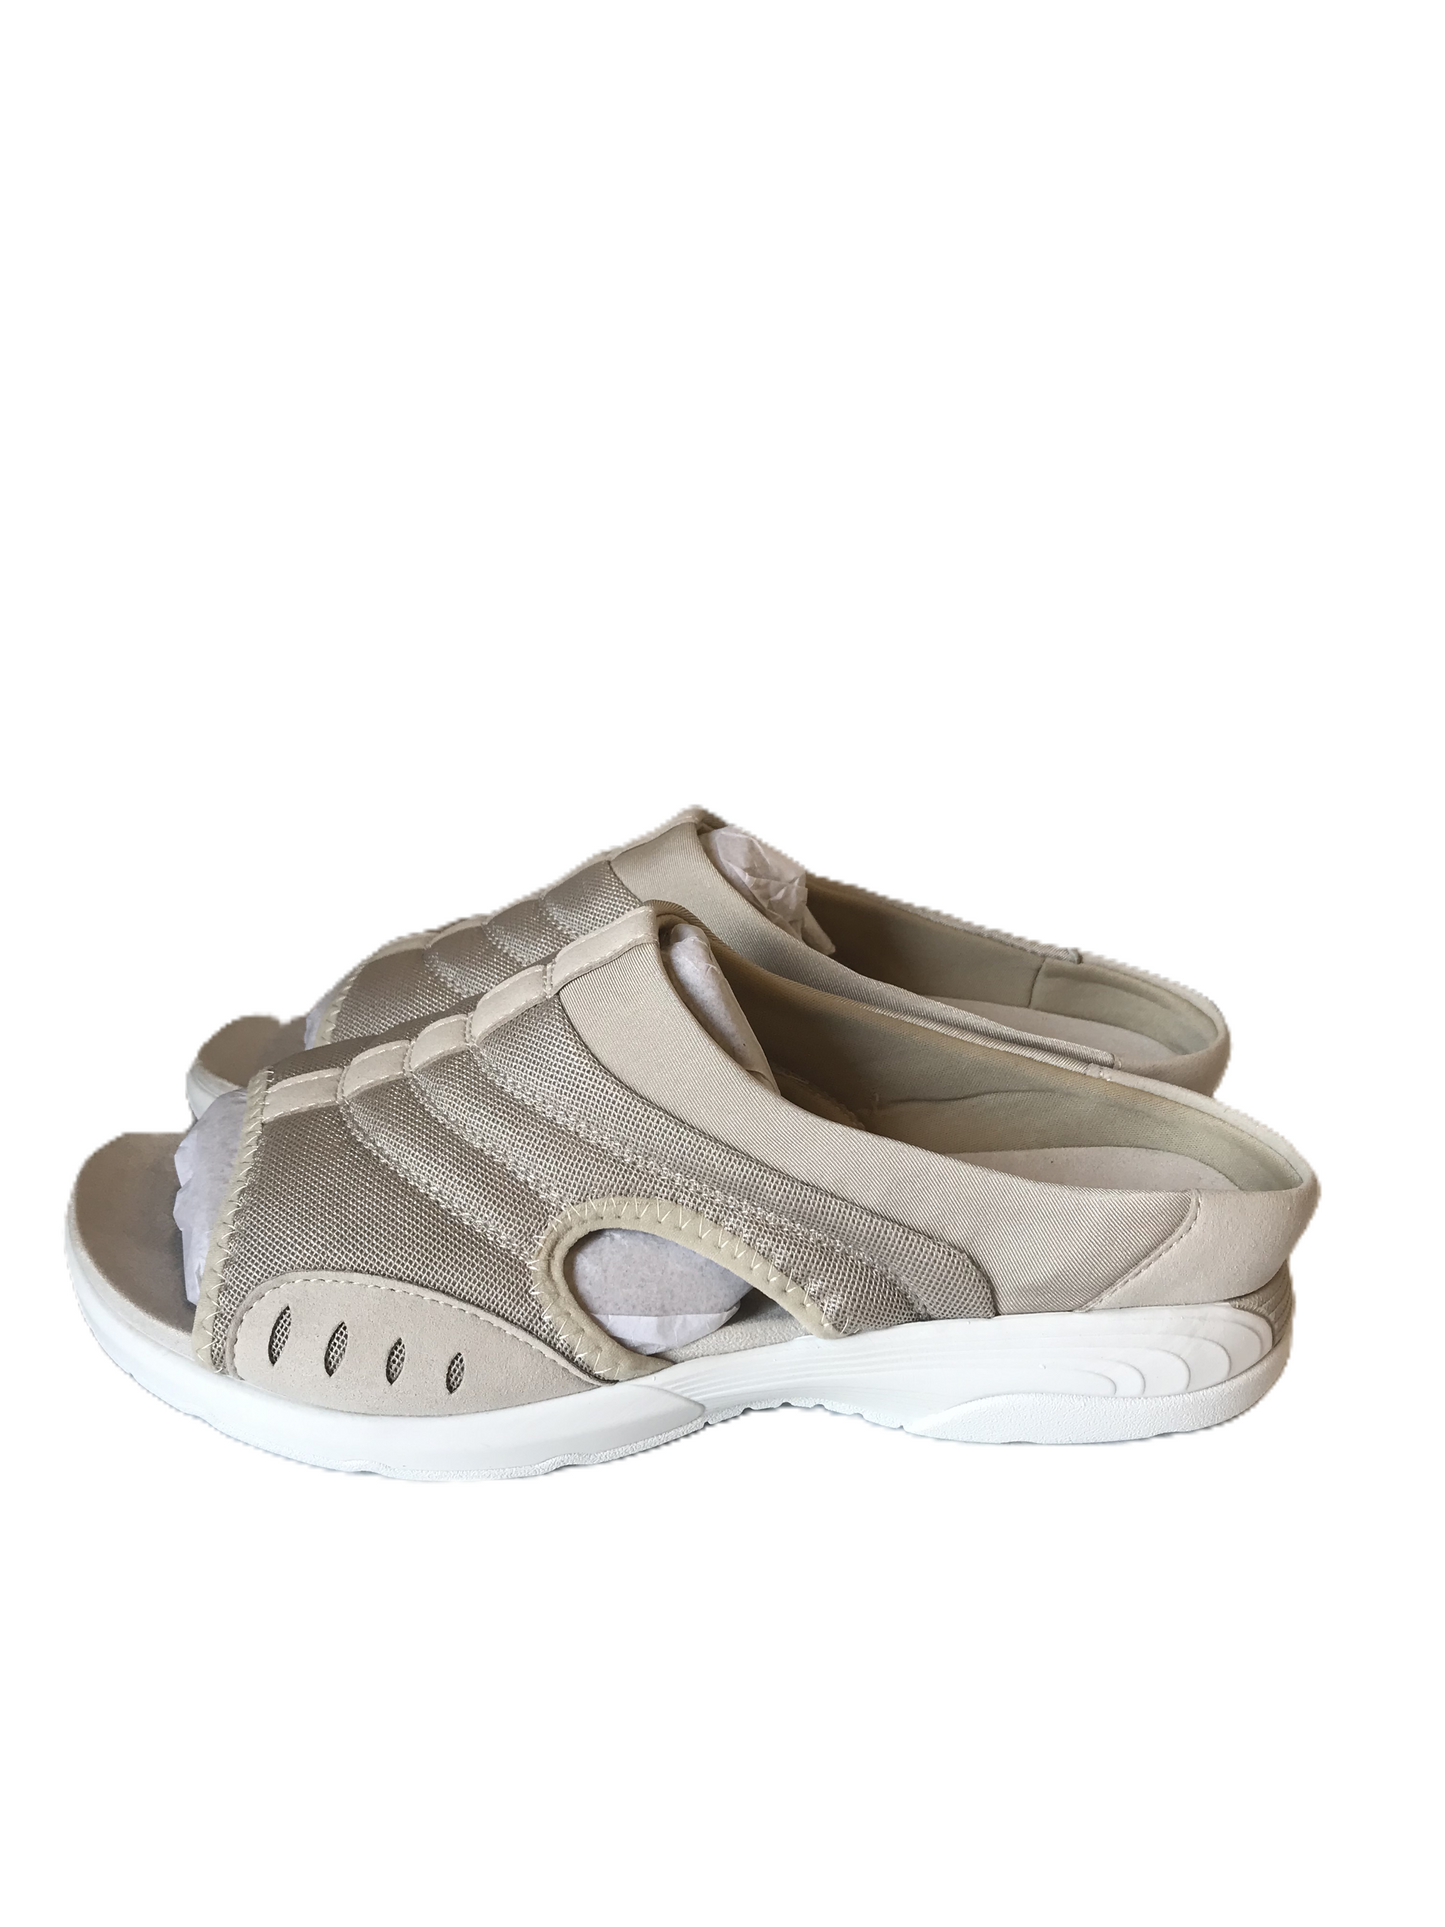 Tan Sandals Sport By Easy Spirit, Size: 12